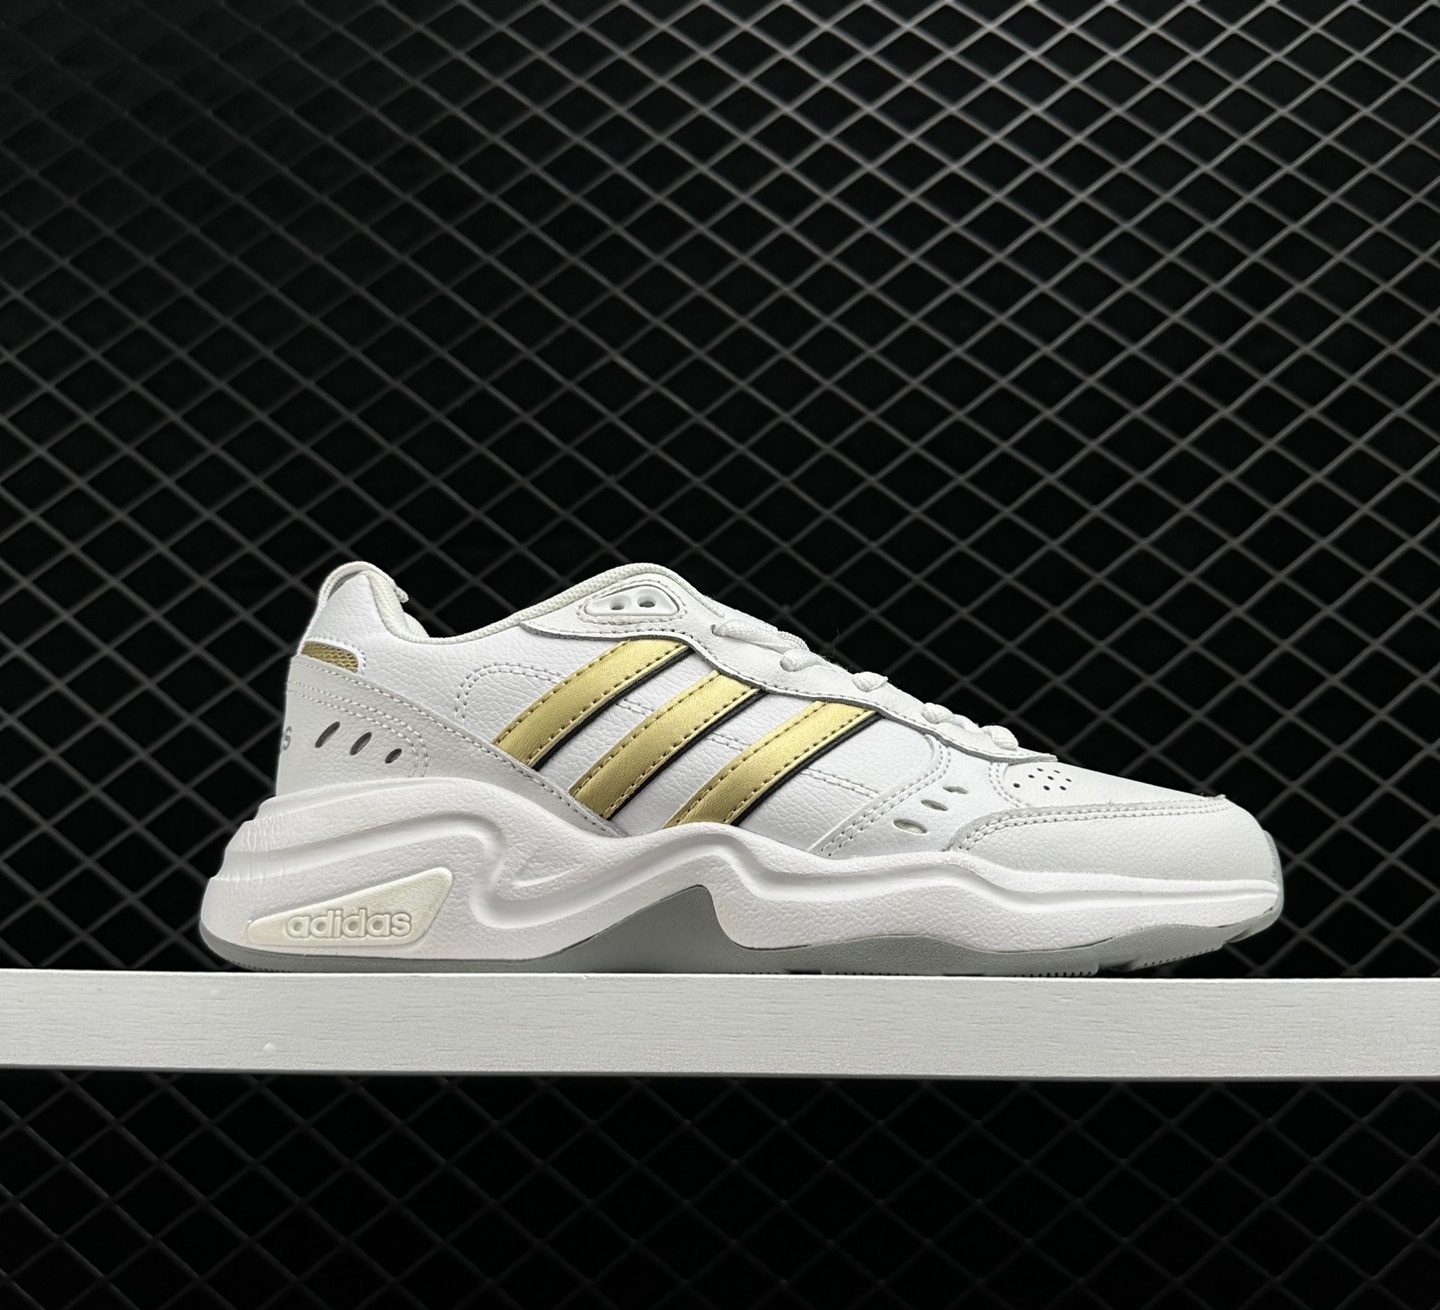 Adidas neo Strutter White Gold GX0671 - Stylish and Trendy Sneakers